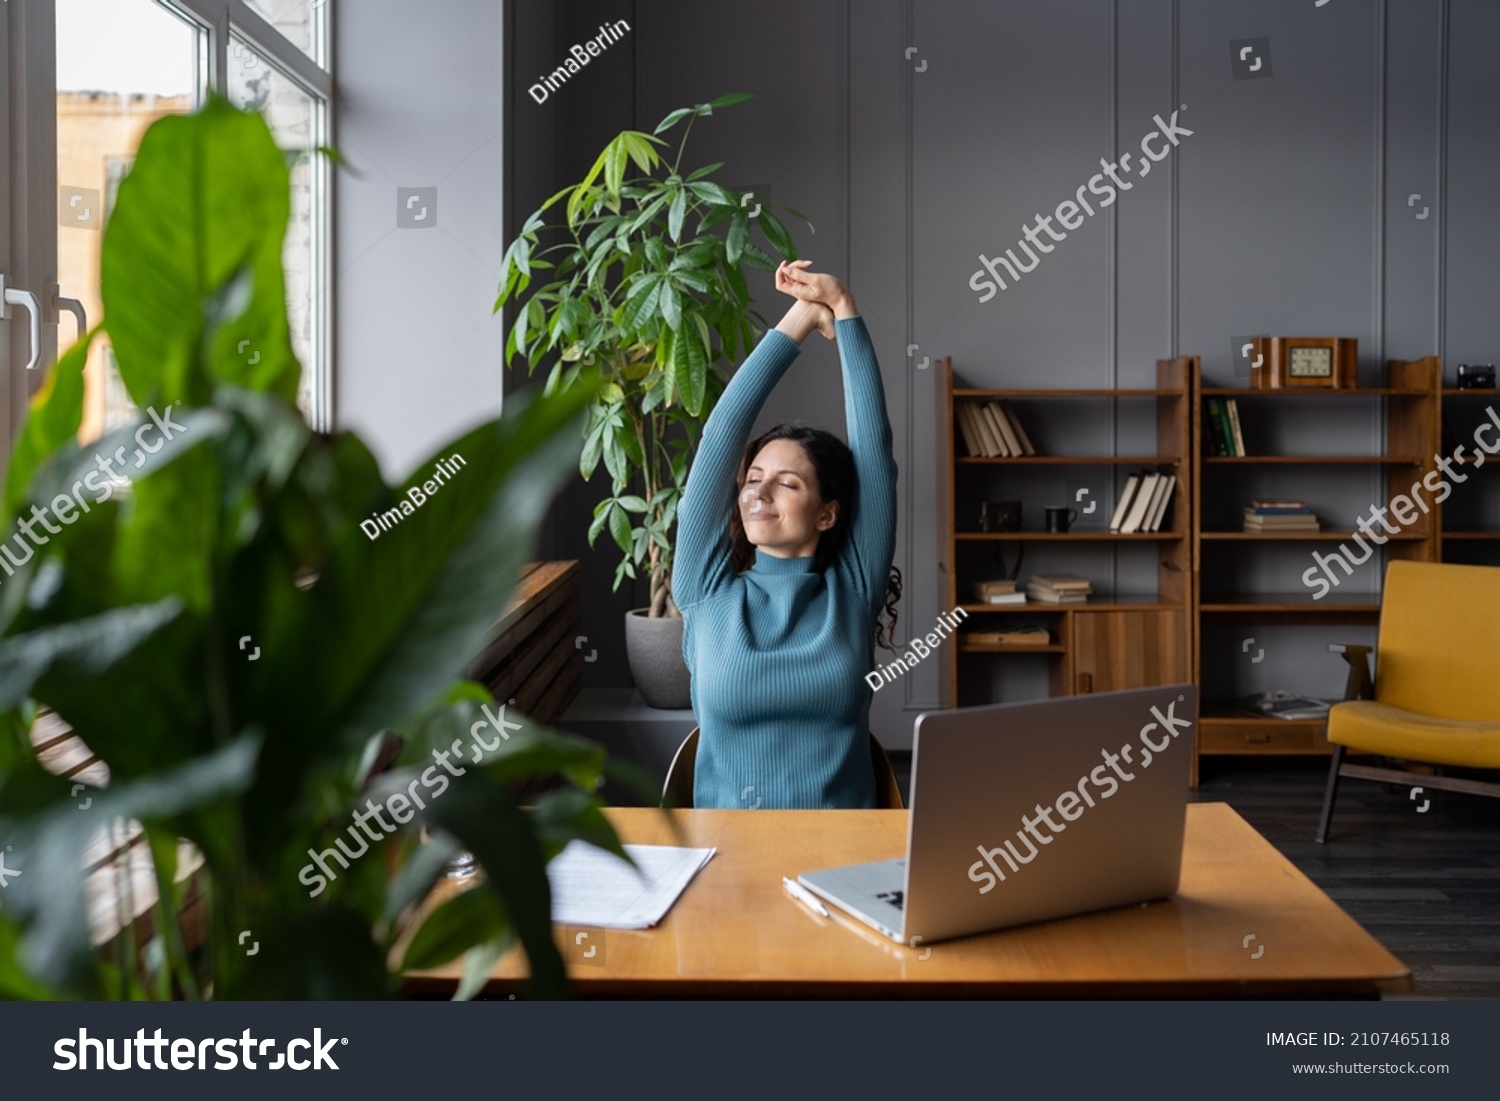 Relaxed office worker woman stretching hands and body taking break from work on laptop smiling look in window. Joyful freelancer copywriter girl happy with task done at workplace in coworking space #2107465118